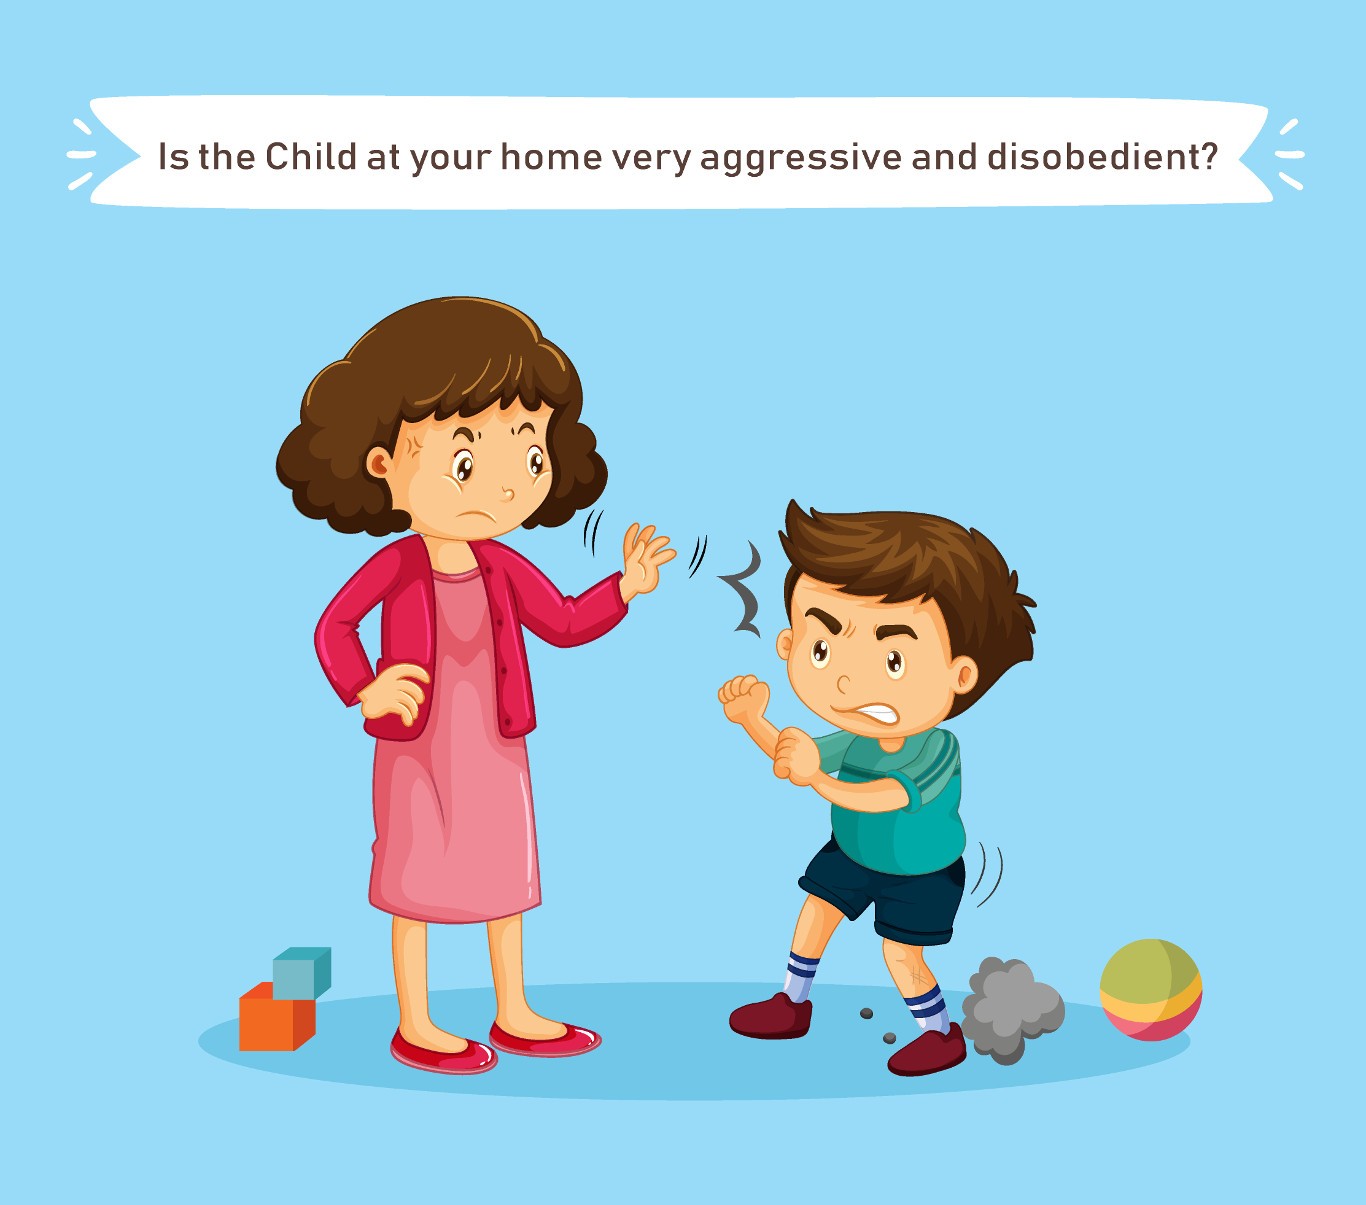 Parenting an aggressive and disobedient child